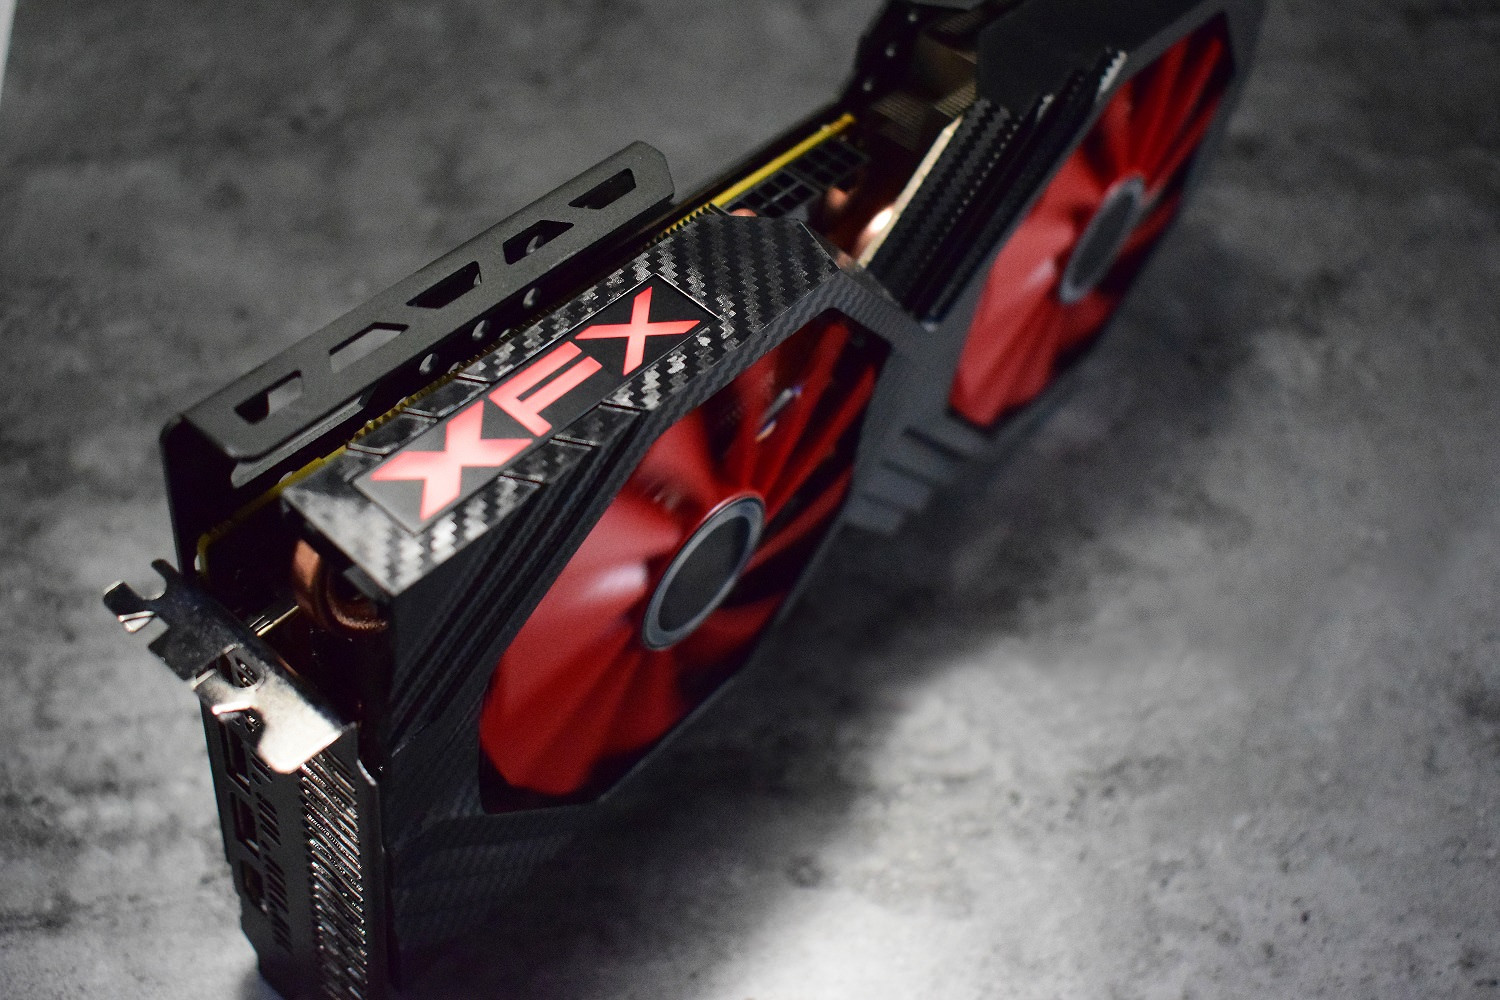 XFX Teases Bold-looking Custom RX Vega Graphics Card | TechPowerUp